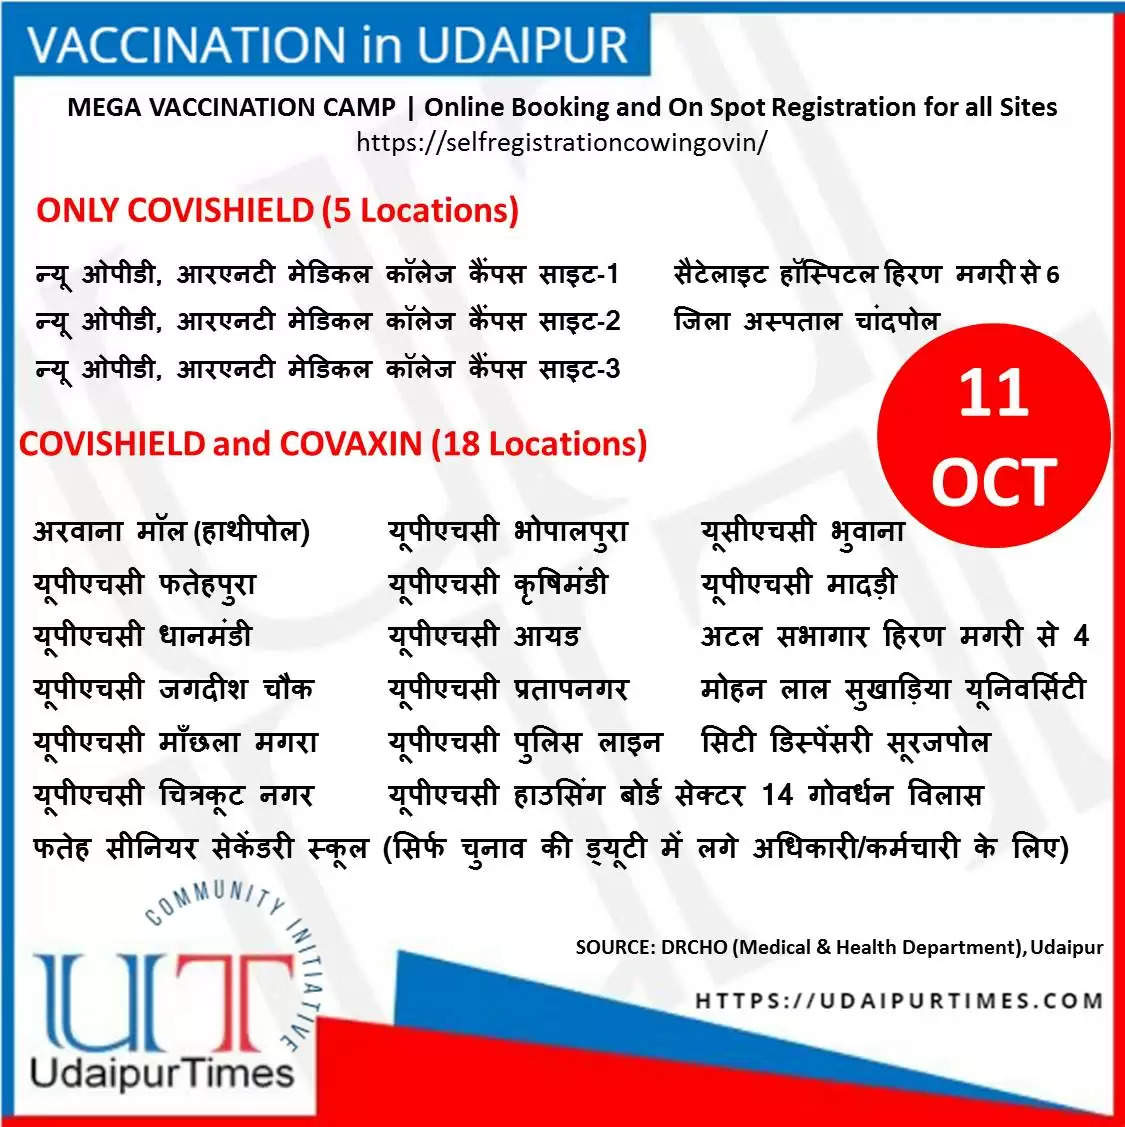 Vaccination in Udaipur on 11 October